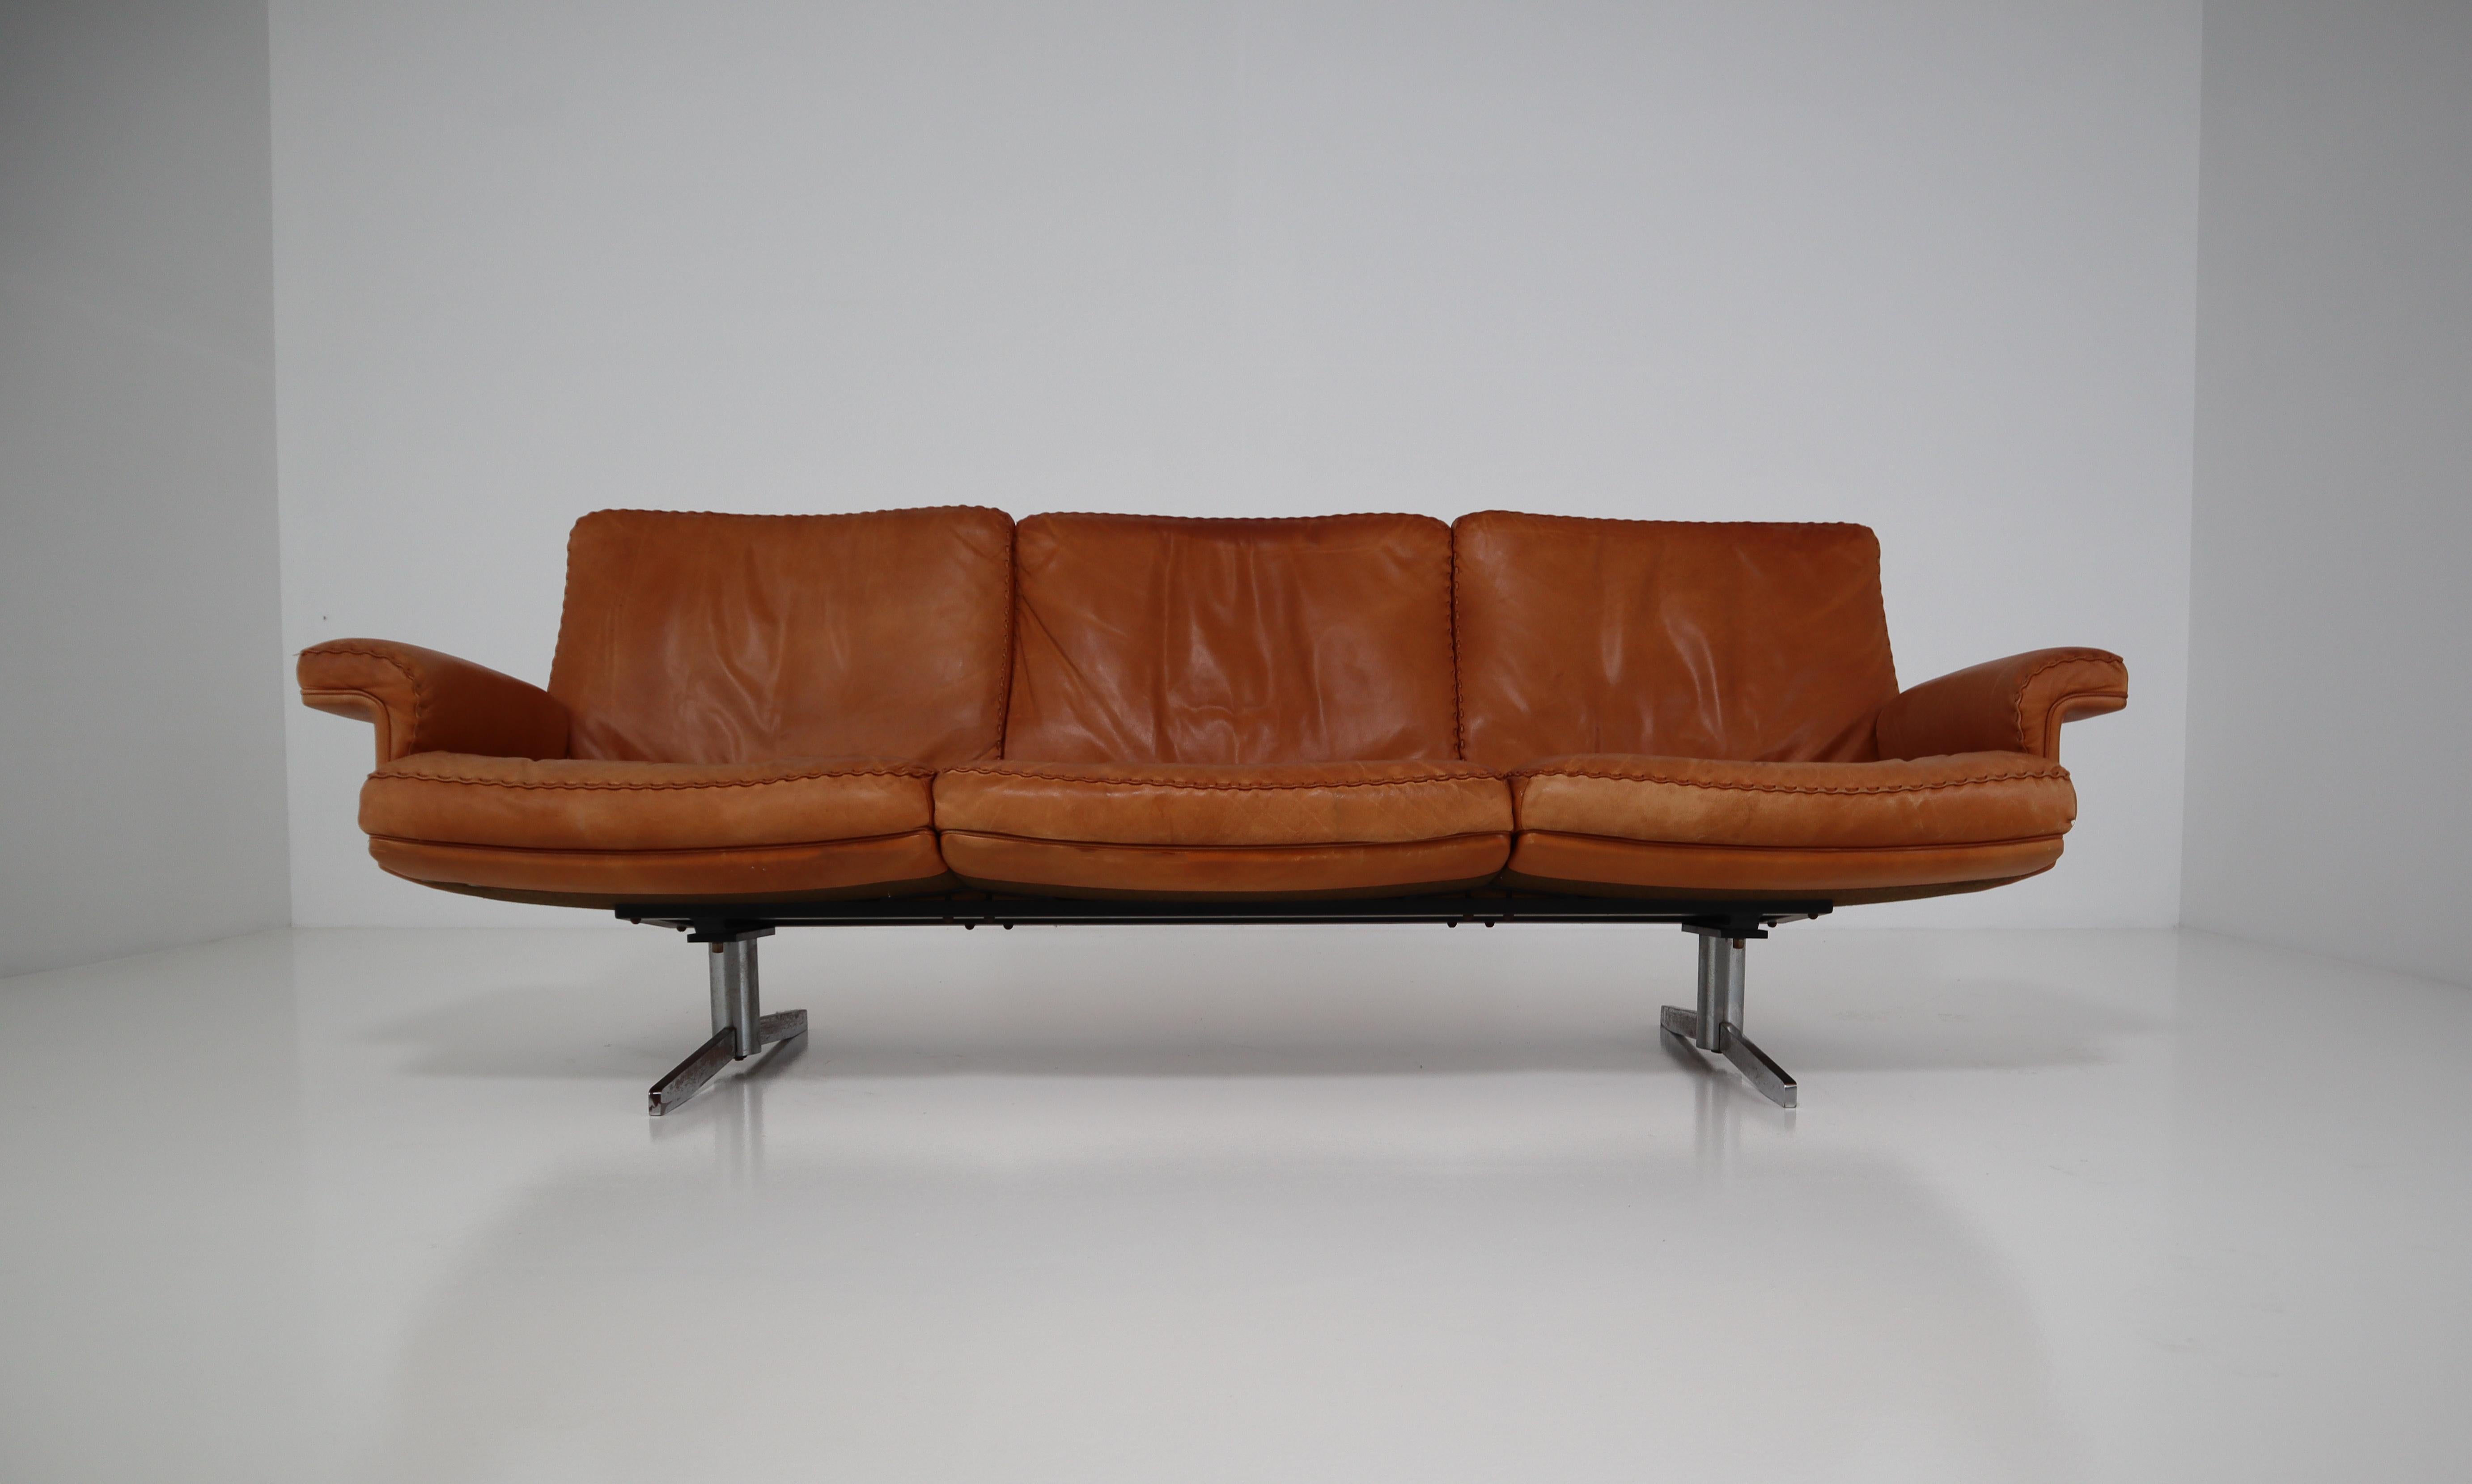 De Sede DS 35 three-seat sofa is upholstered in cognac aniline leather with a whipstitch edge detail. It was manufactured in the late 1960s by De Sede from Switzerland. This three seater sofa stands on polished chrome plated legs. This sofa is in an